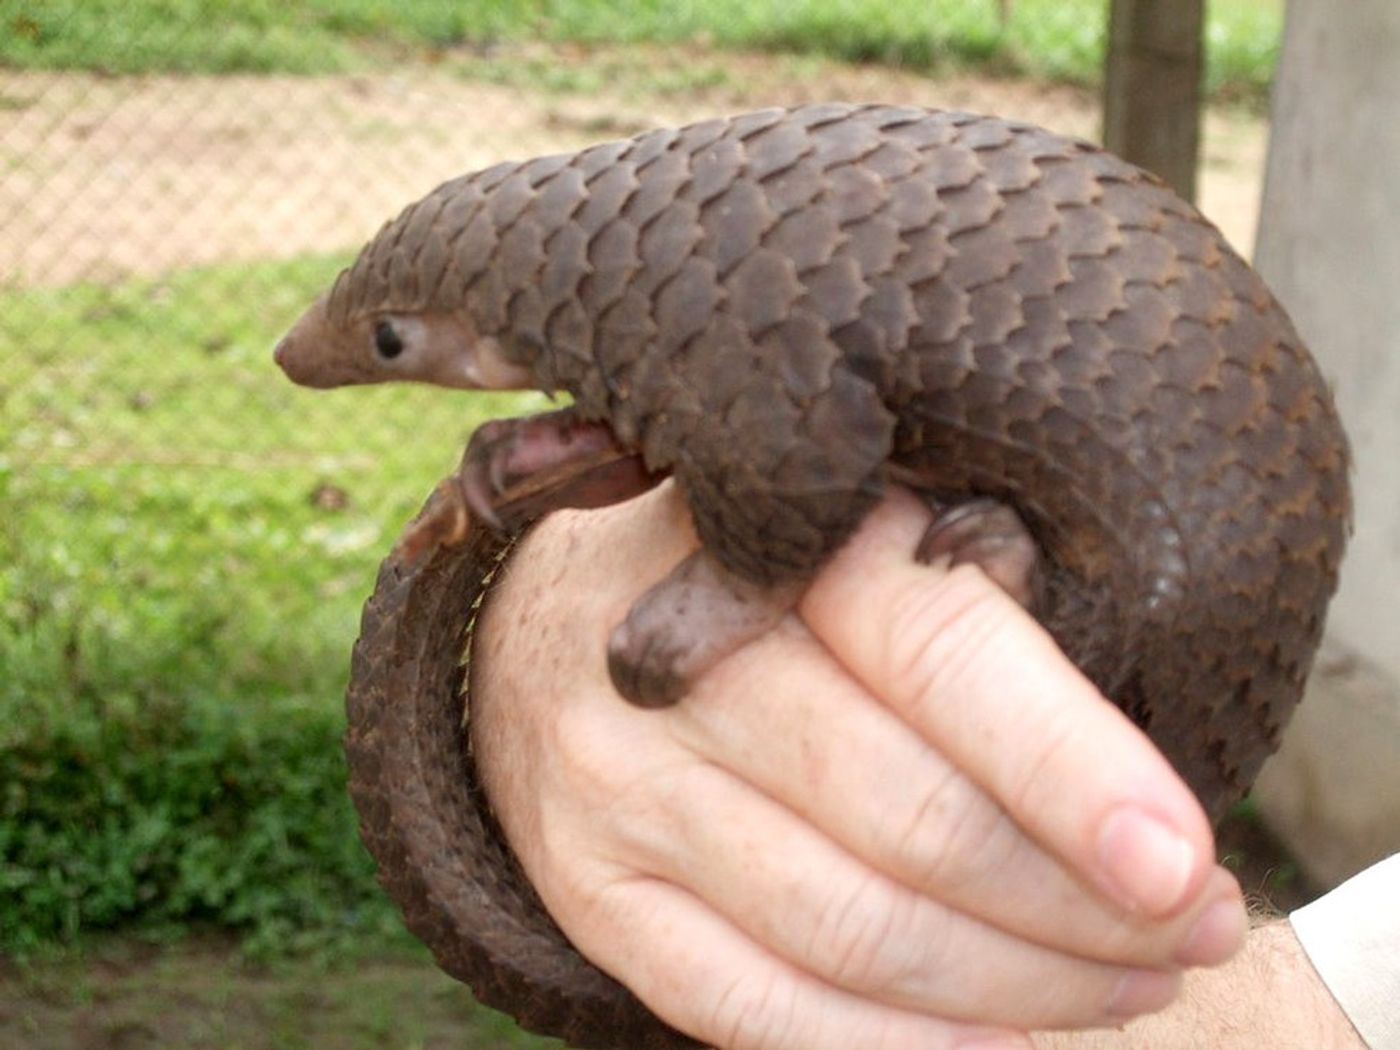 Tree pangolin (Manis tricuspis) in central Democratic Republic of the Congo. Photo by Valerius Tygart from Wikimedia Commons CC BY-SA 3.0.